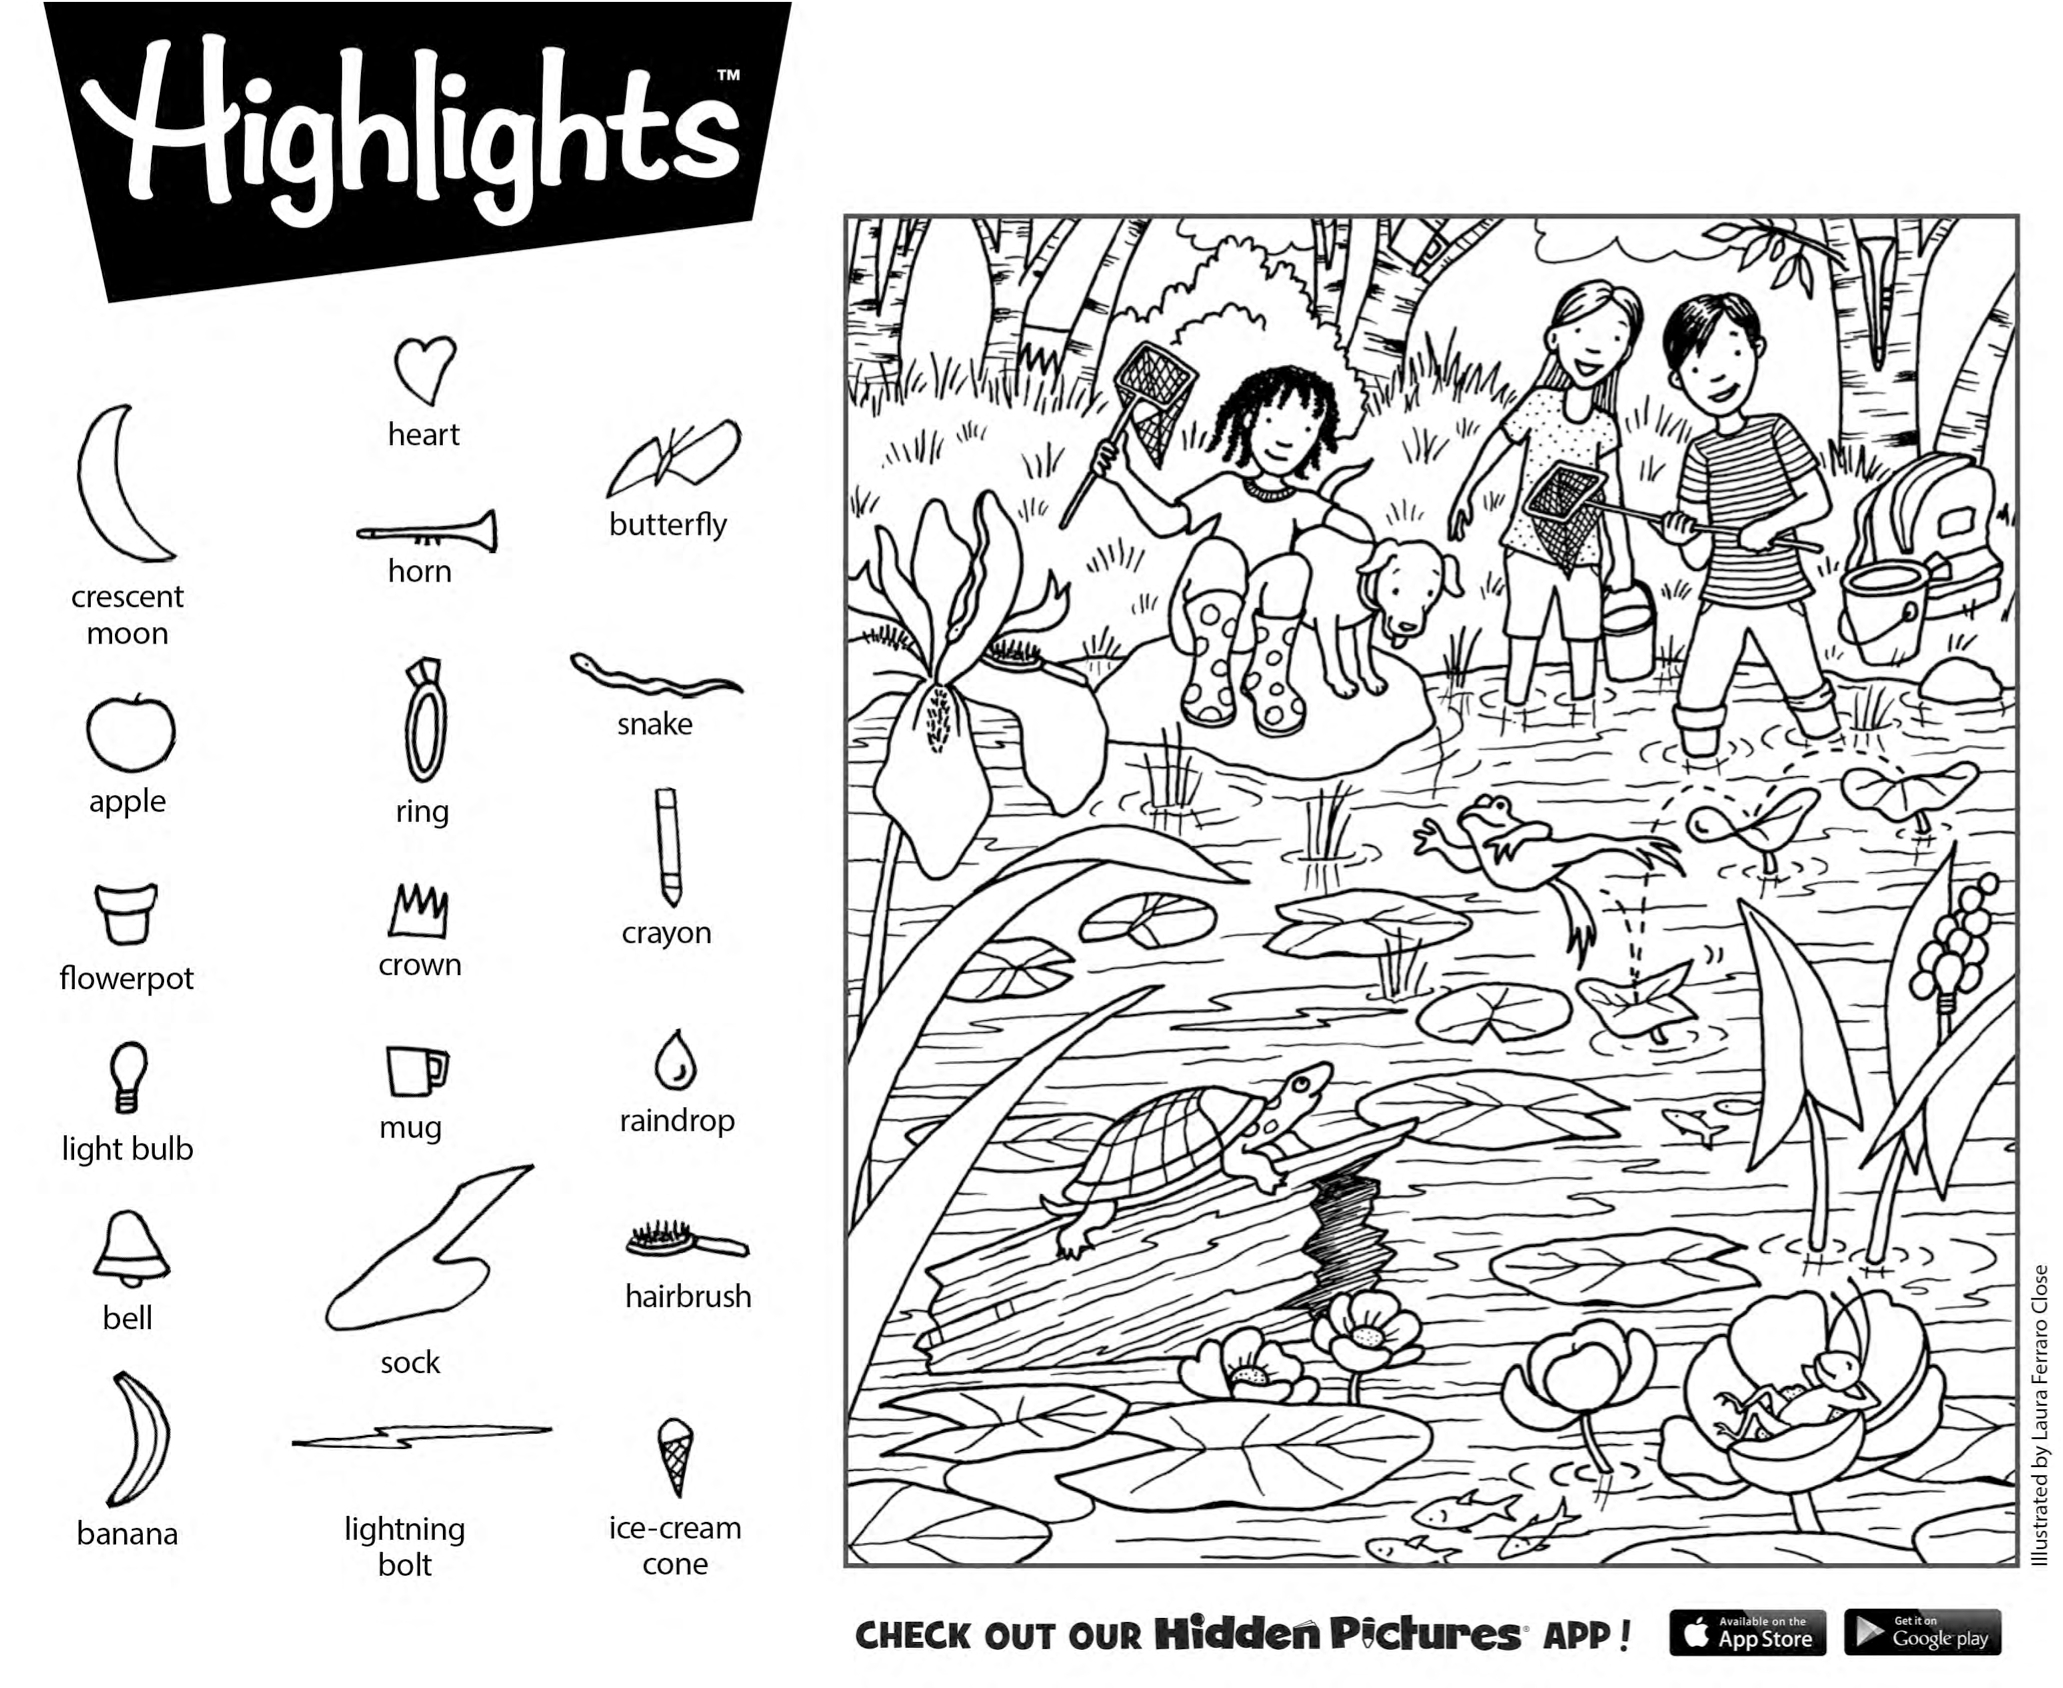 Download This Free Printable Hidden Pictures Puzzle From Highlights - Free Printable Highlights Hidden Pictures